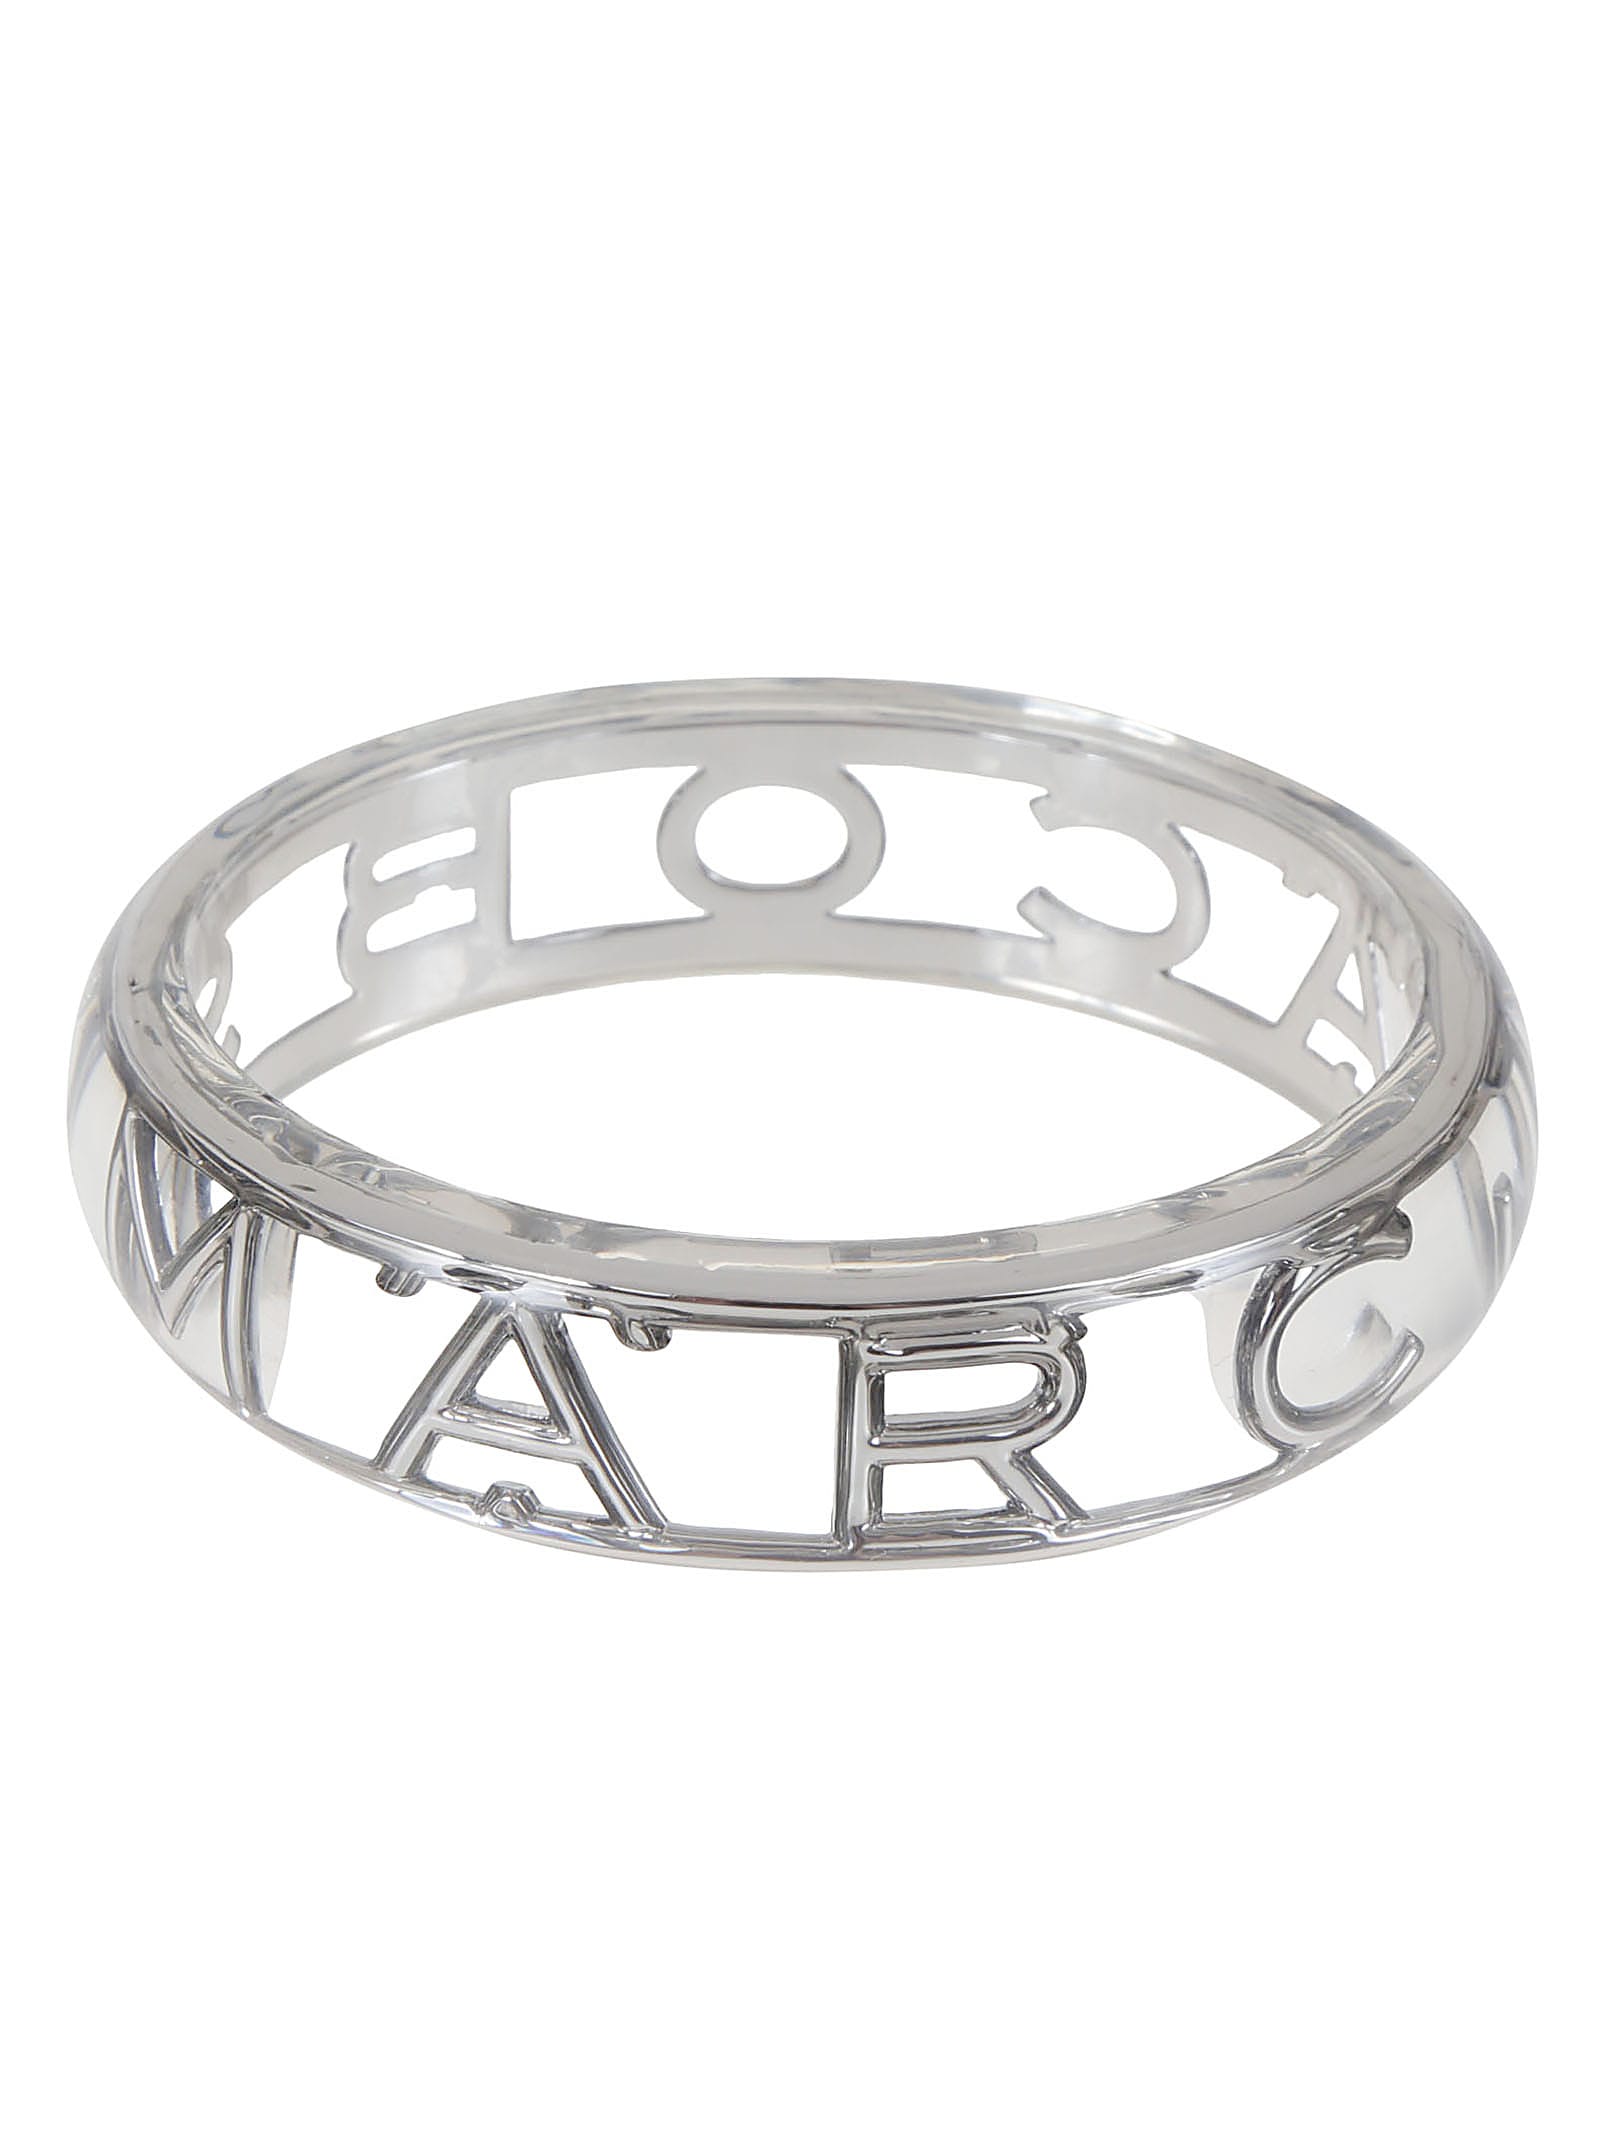 Marc Jacobs Gold 'The Monogram' Ring